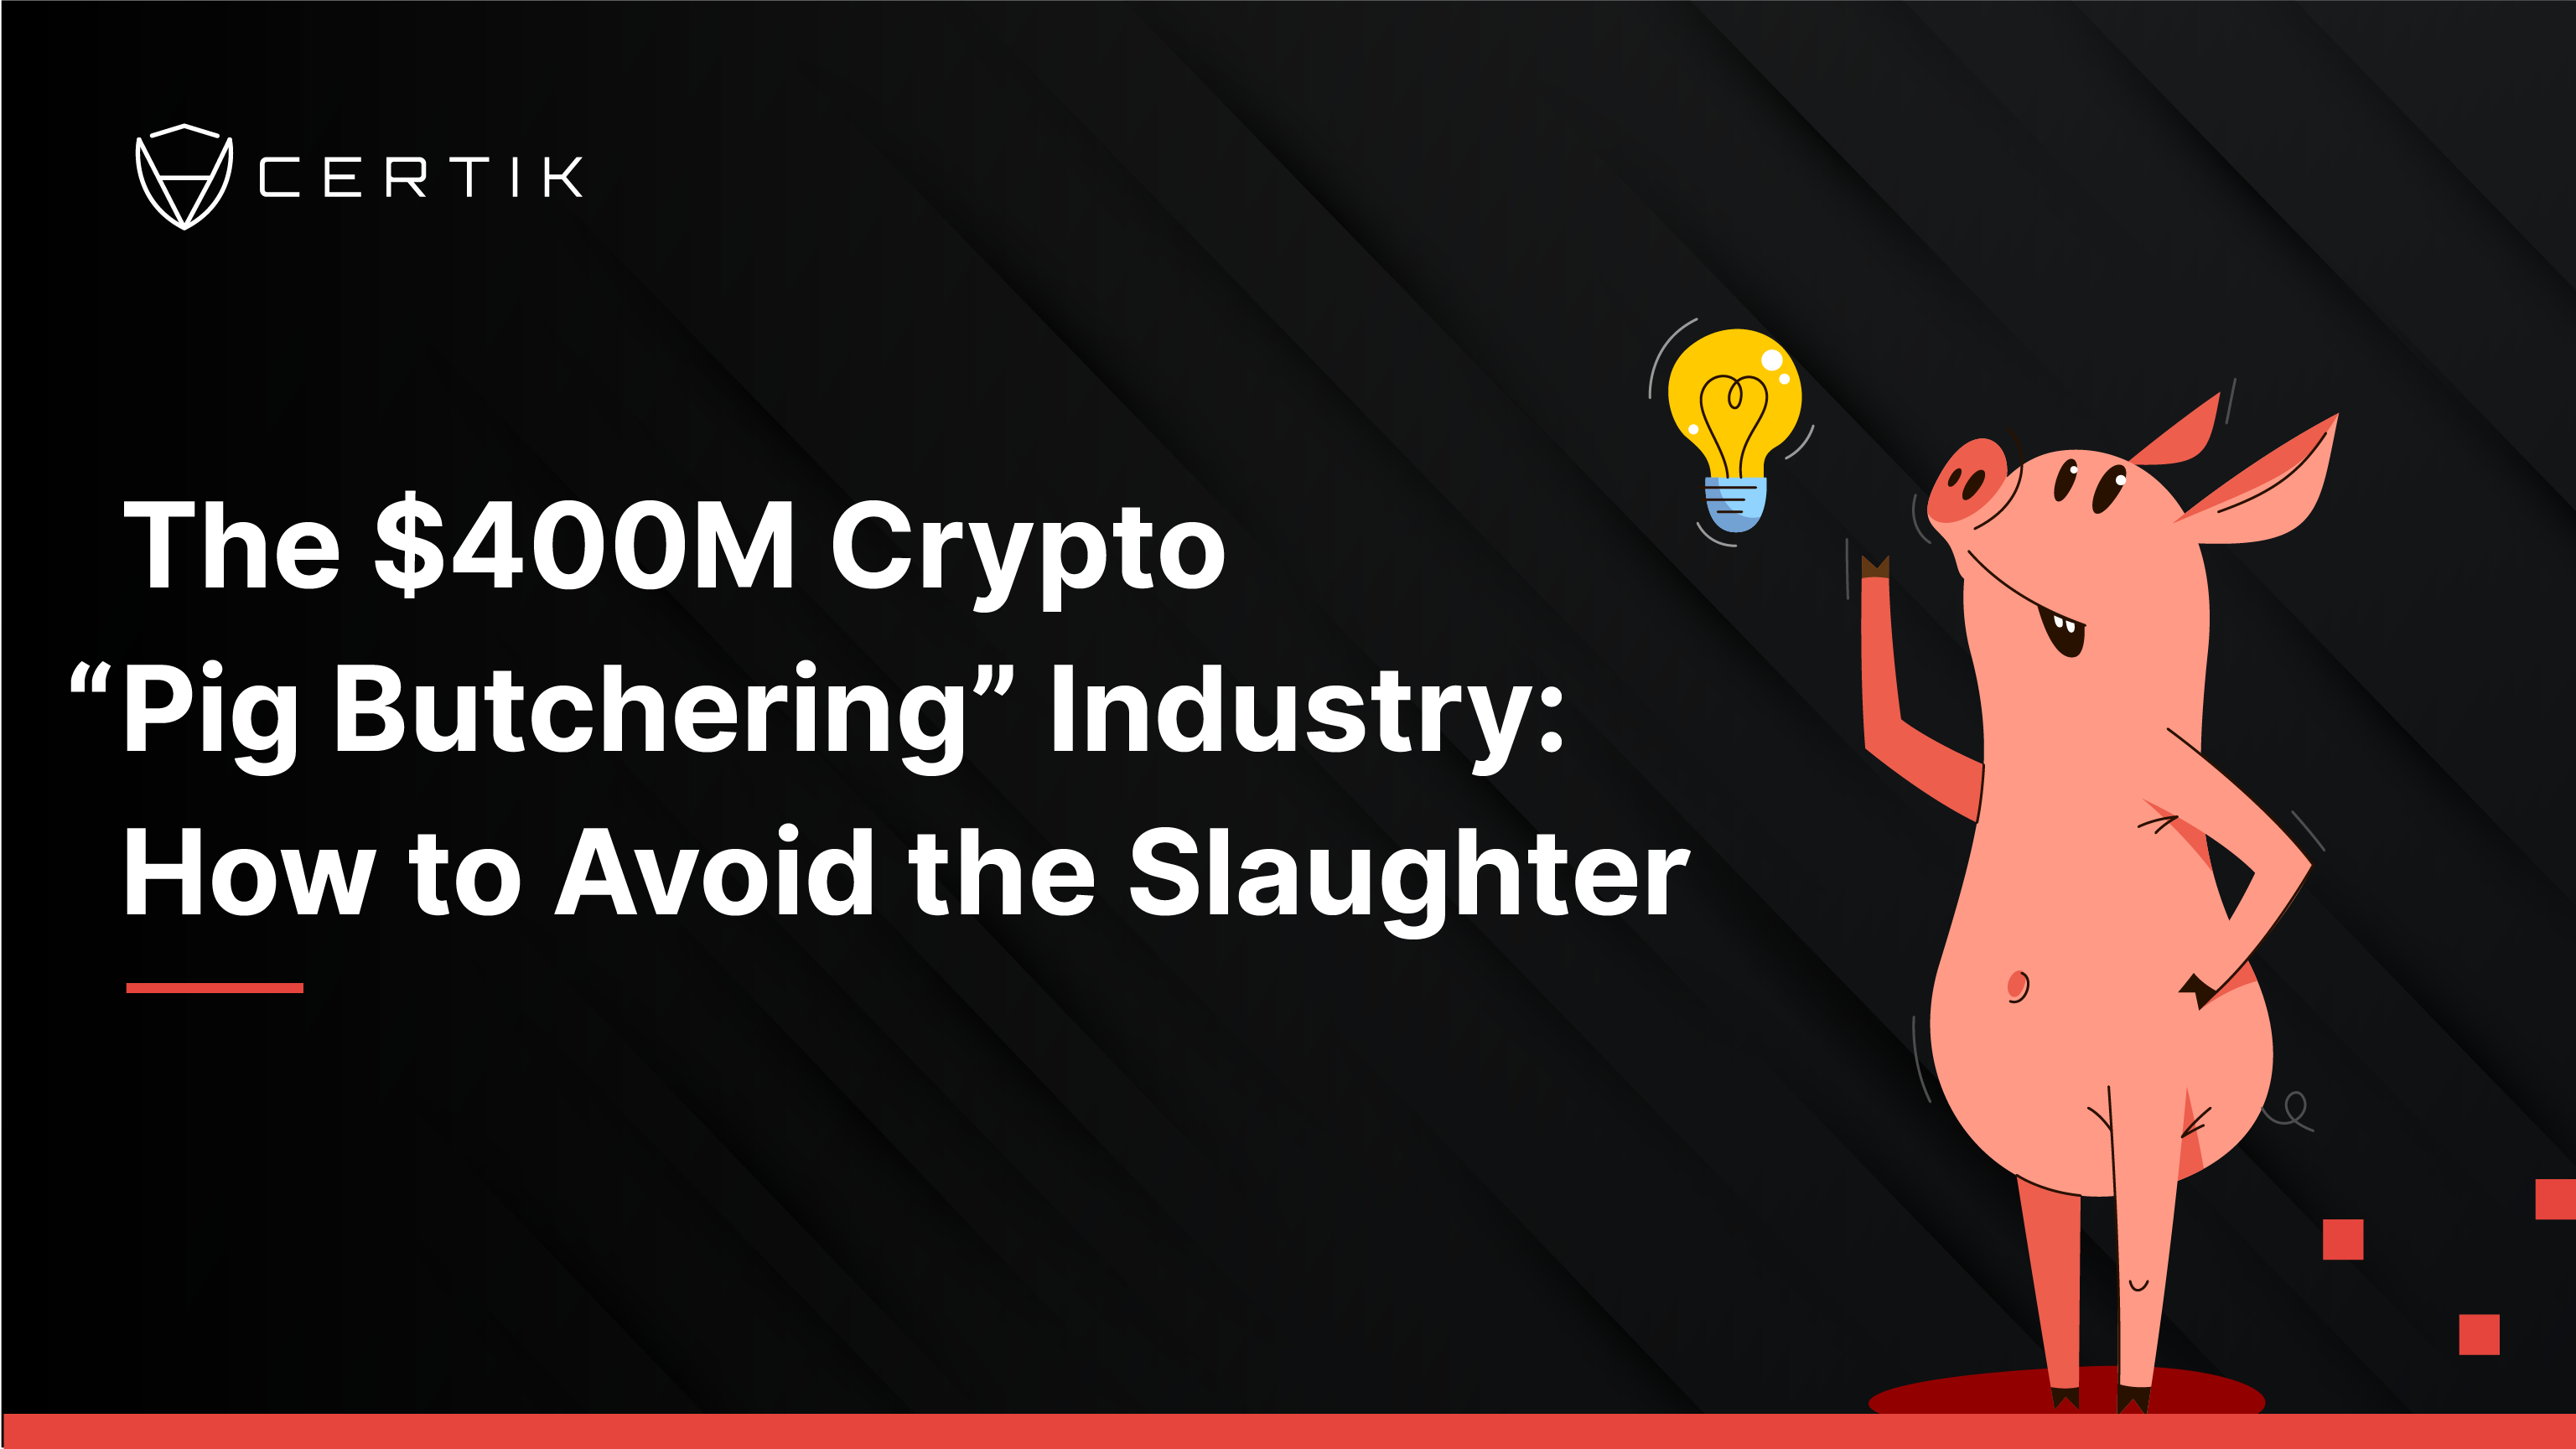 The $400M Crypto “Pig Butchering” Industry: How to Avoid the Slaughter